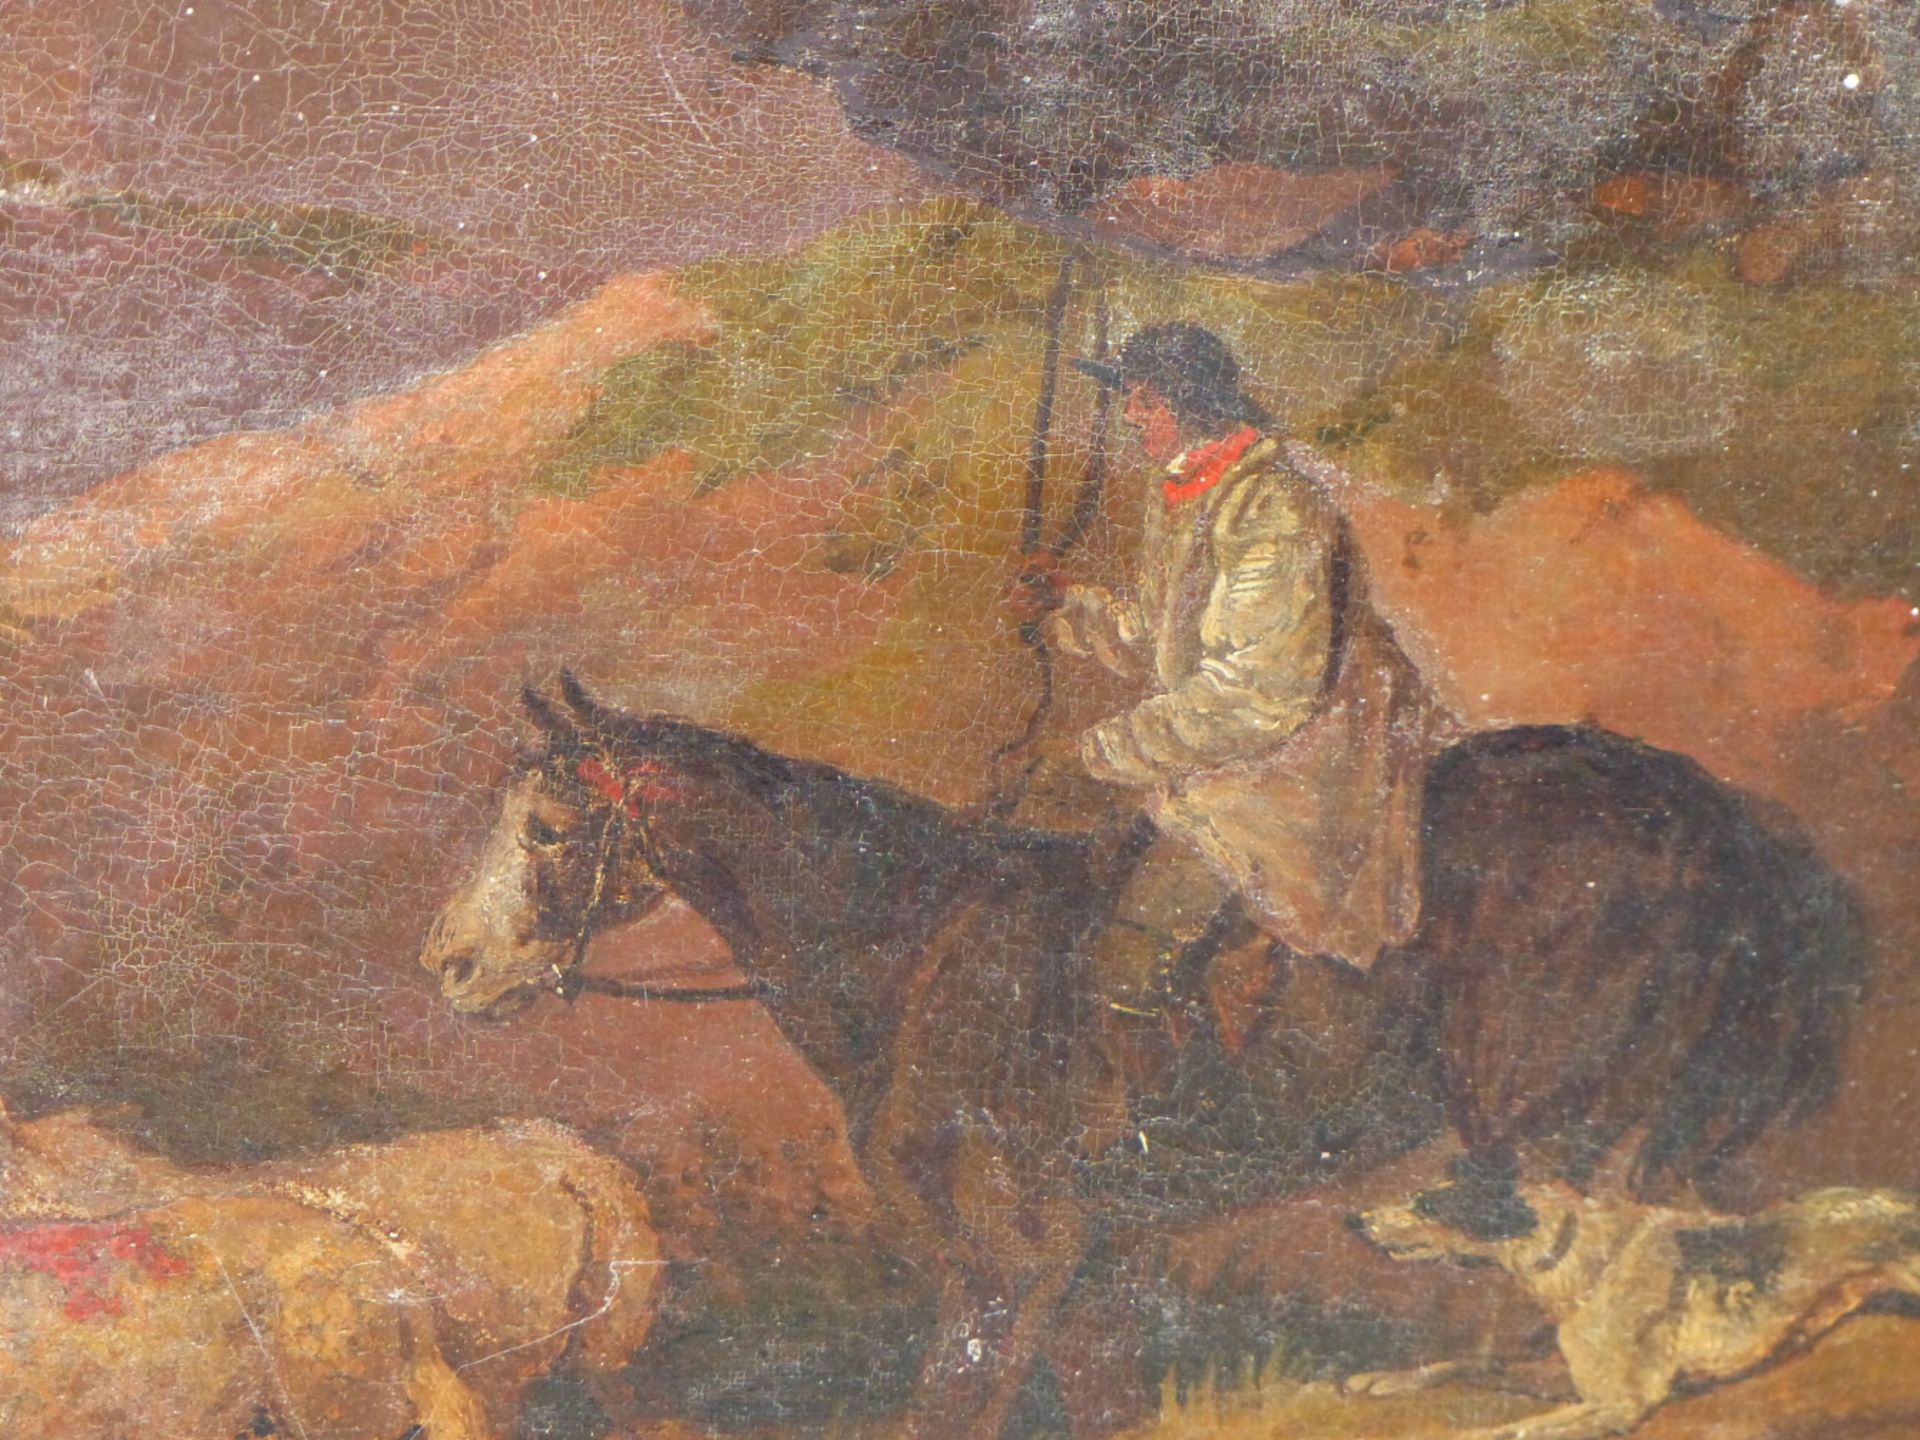 19th C. ENGLISH SCHOOL IN THE MANNER OF GEORGE MORLAND. HERDING THE CATTLE, OIL ON CANVAS. 41 x - Image 4 of 11